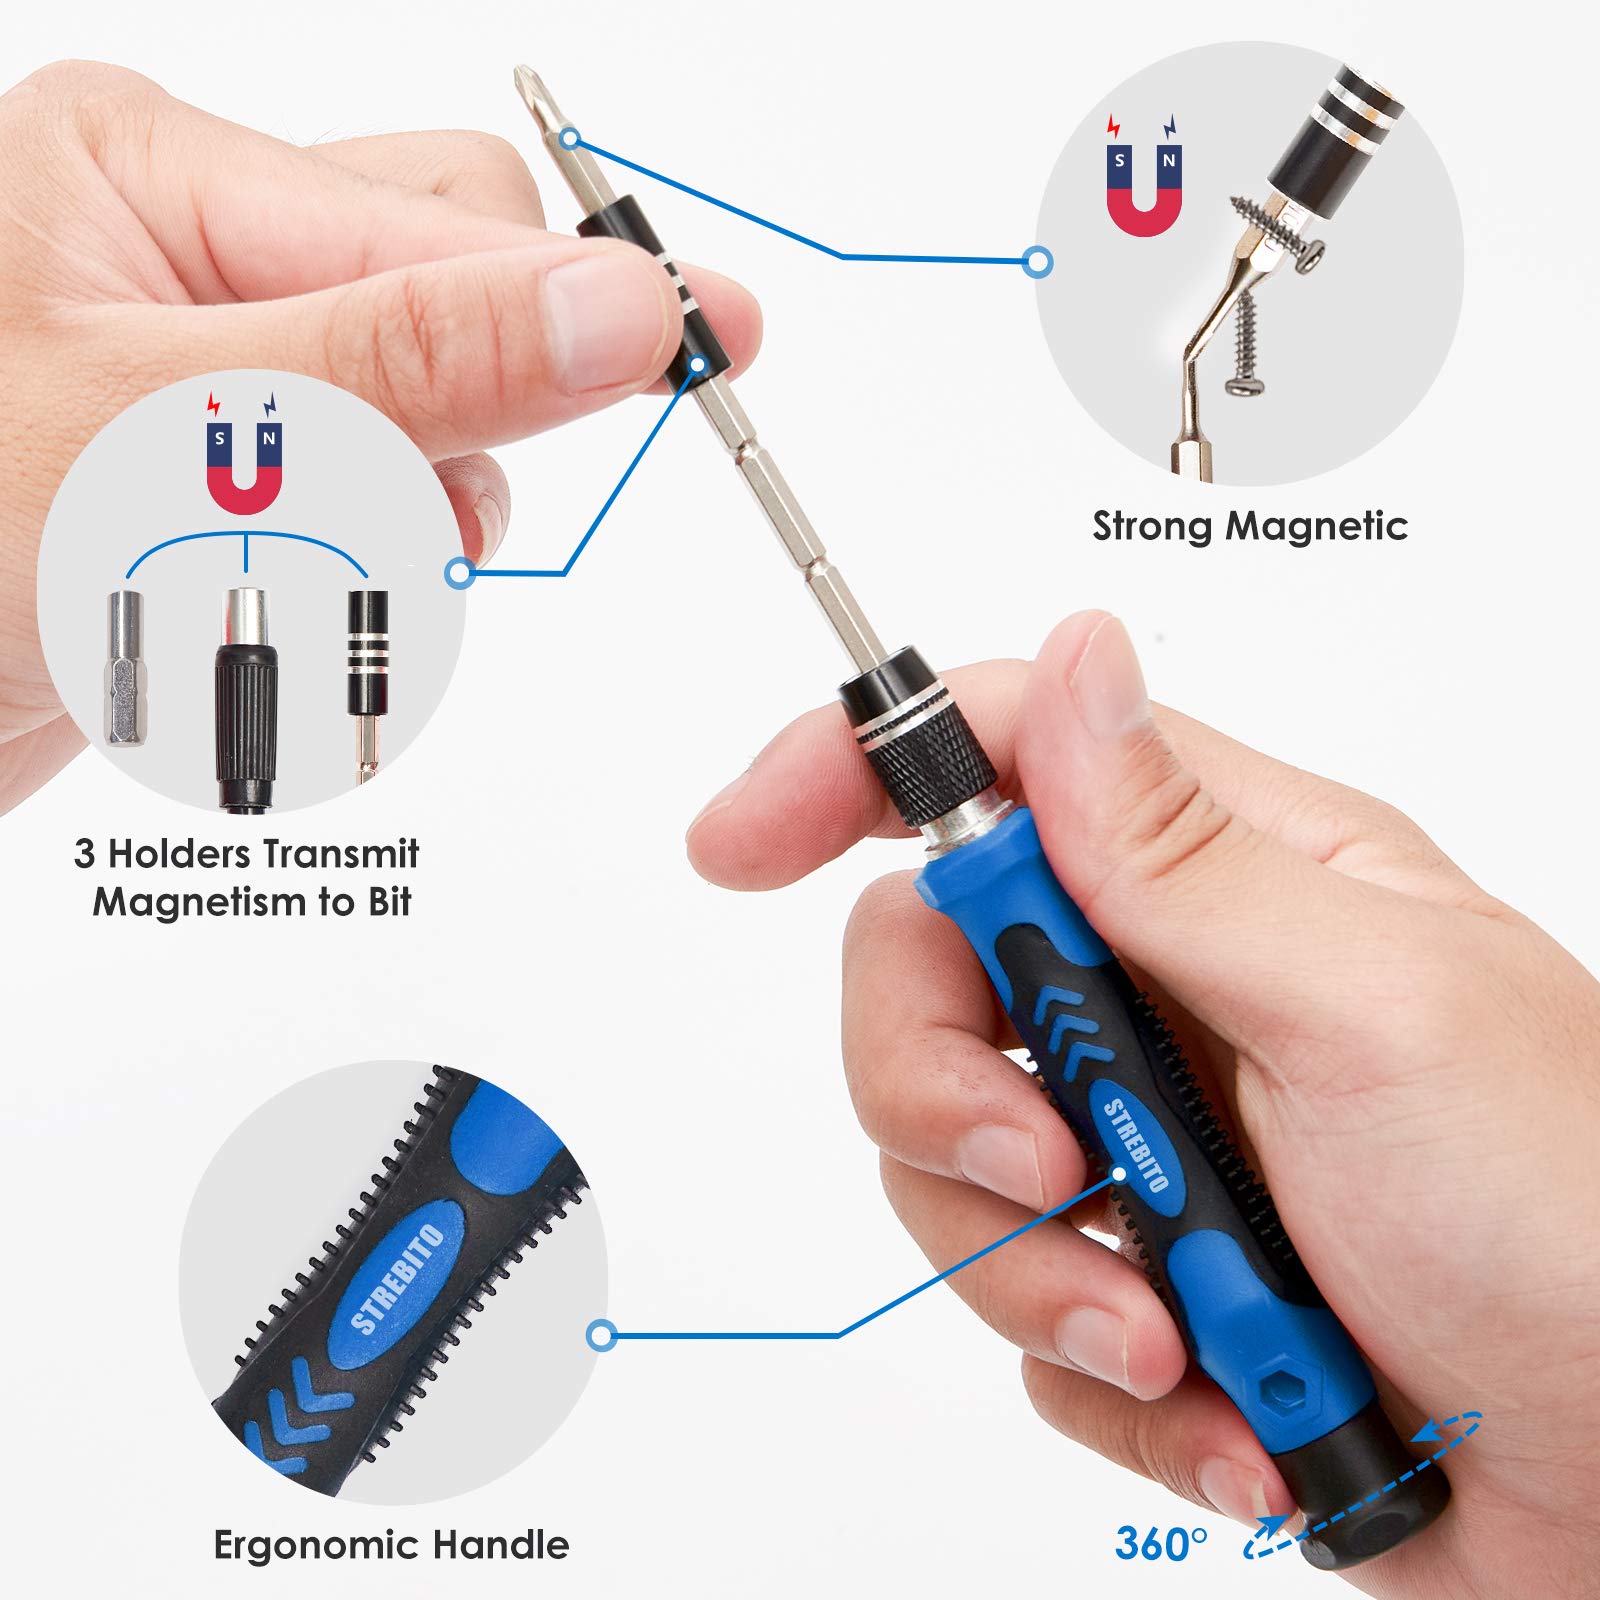 142-Piece Electronics Precision Screwdriver with 120 Bits Magnetic Repair Tool Kit for iPhone, MacBook, Computer, Laptop, PC, Tablet, PS4, Xbox, Nintendo, Console Blue&Red